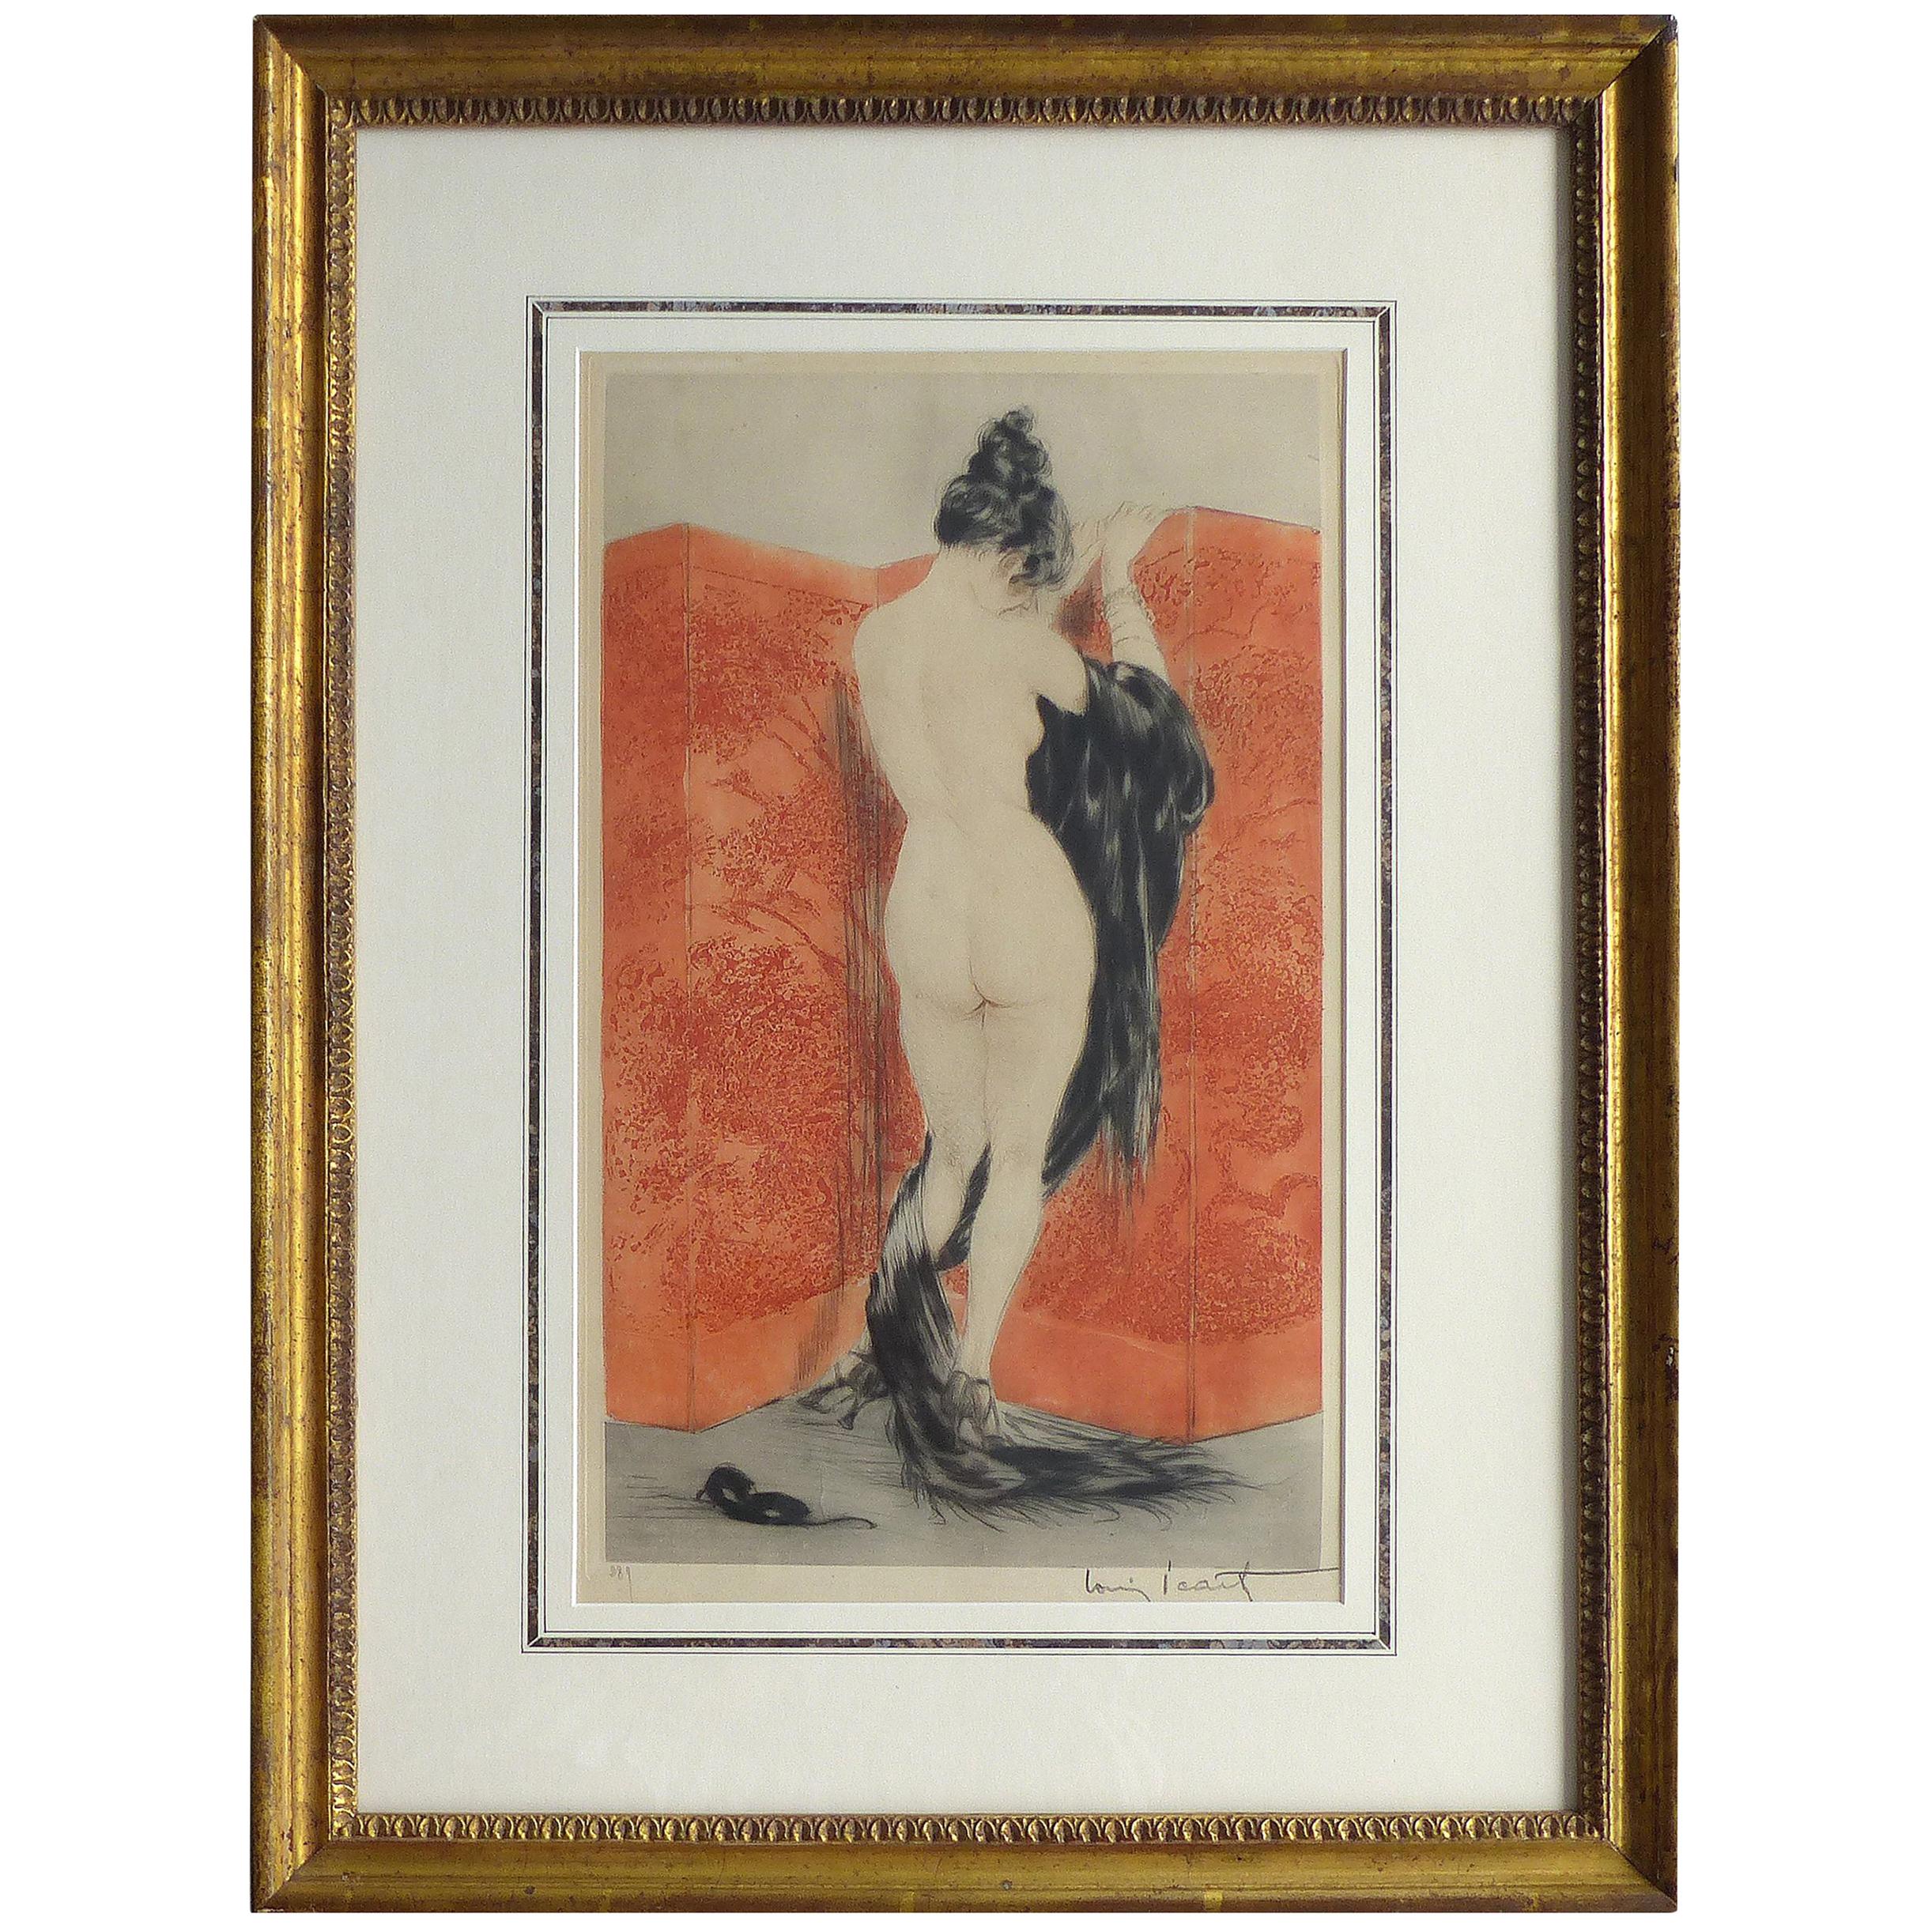 "Lacquered Screen" by Louis Icart Etching Pencil Signed and Numbered 289